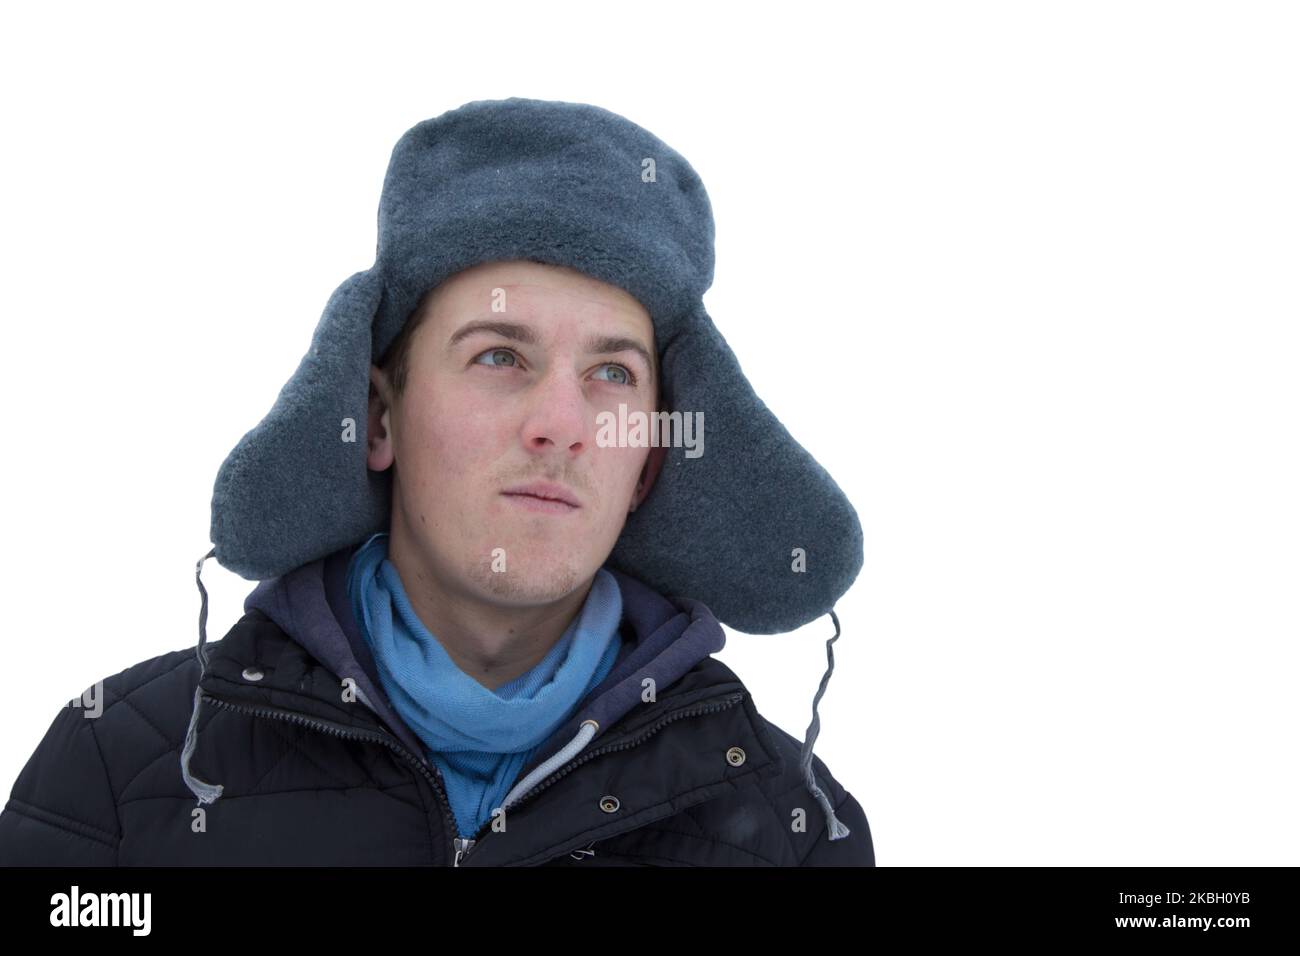 Isolated man in a winter hat with ears on a white background Stock Photo